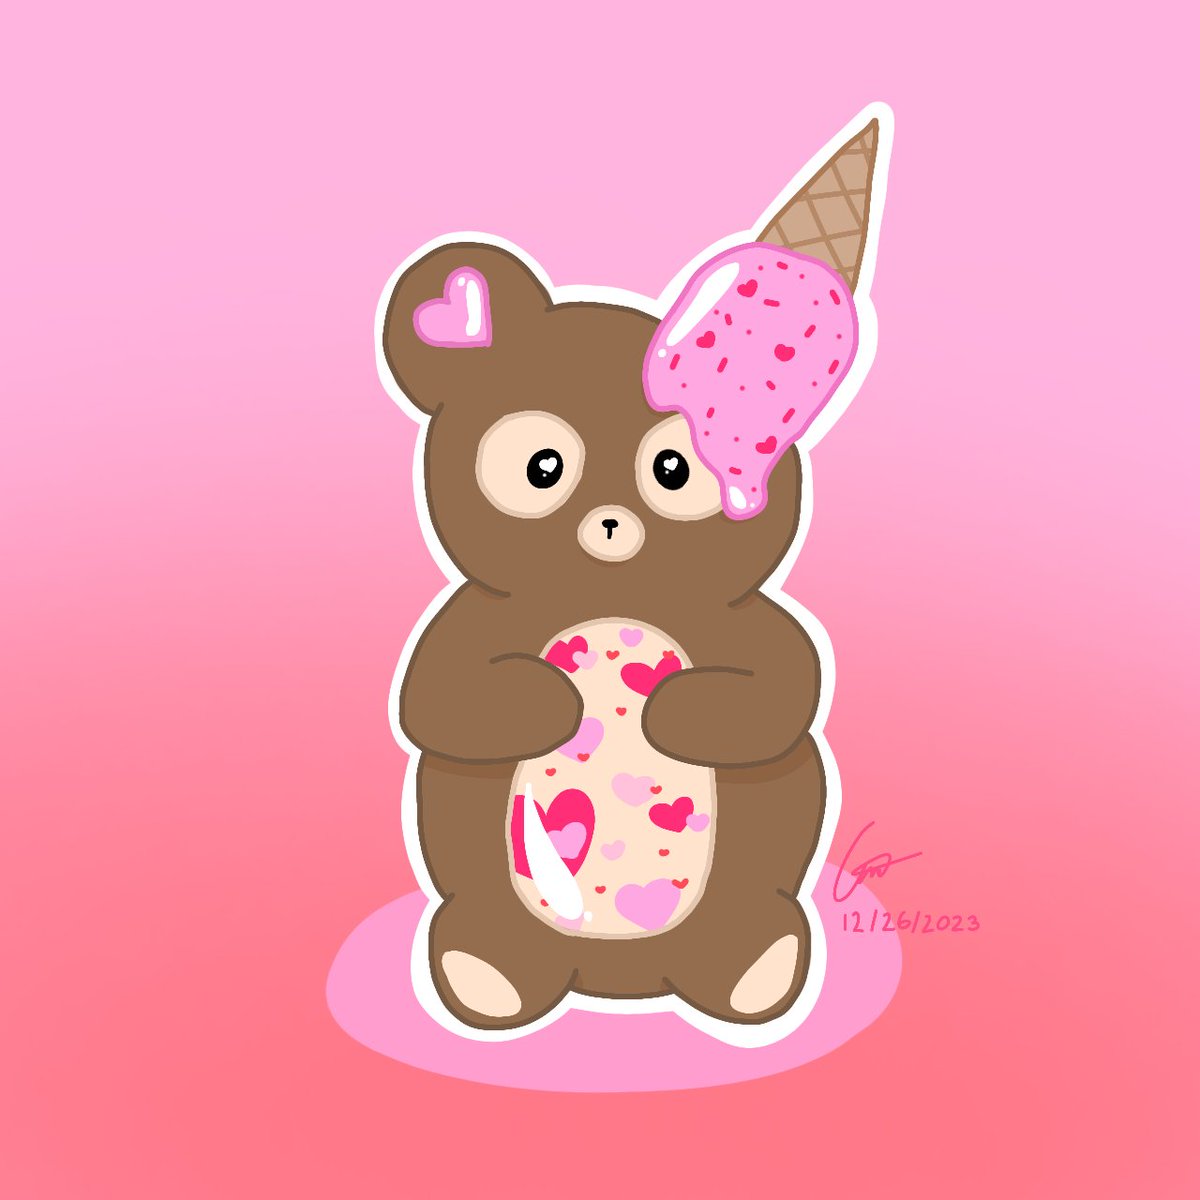 Came up with a pet concept for overlook bay 2 valentine event!! 
•°• Cupid's Doll
•°• Valentine bear
#overlookbay #overlookbay2 #robloxart